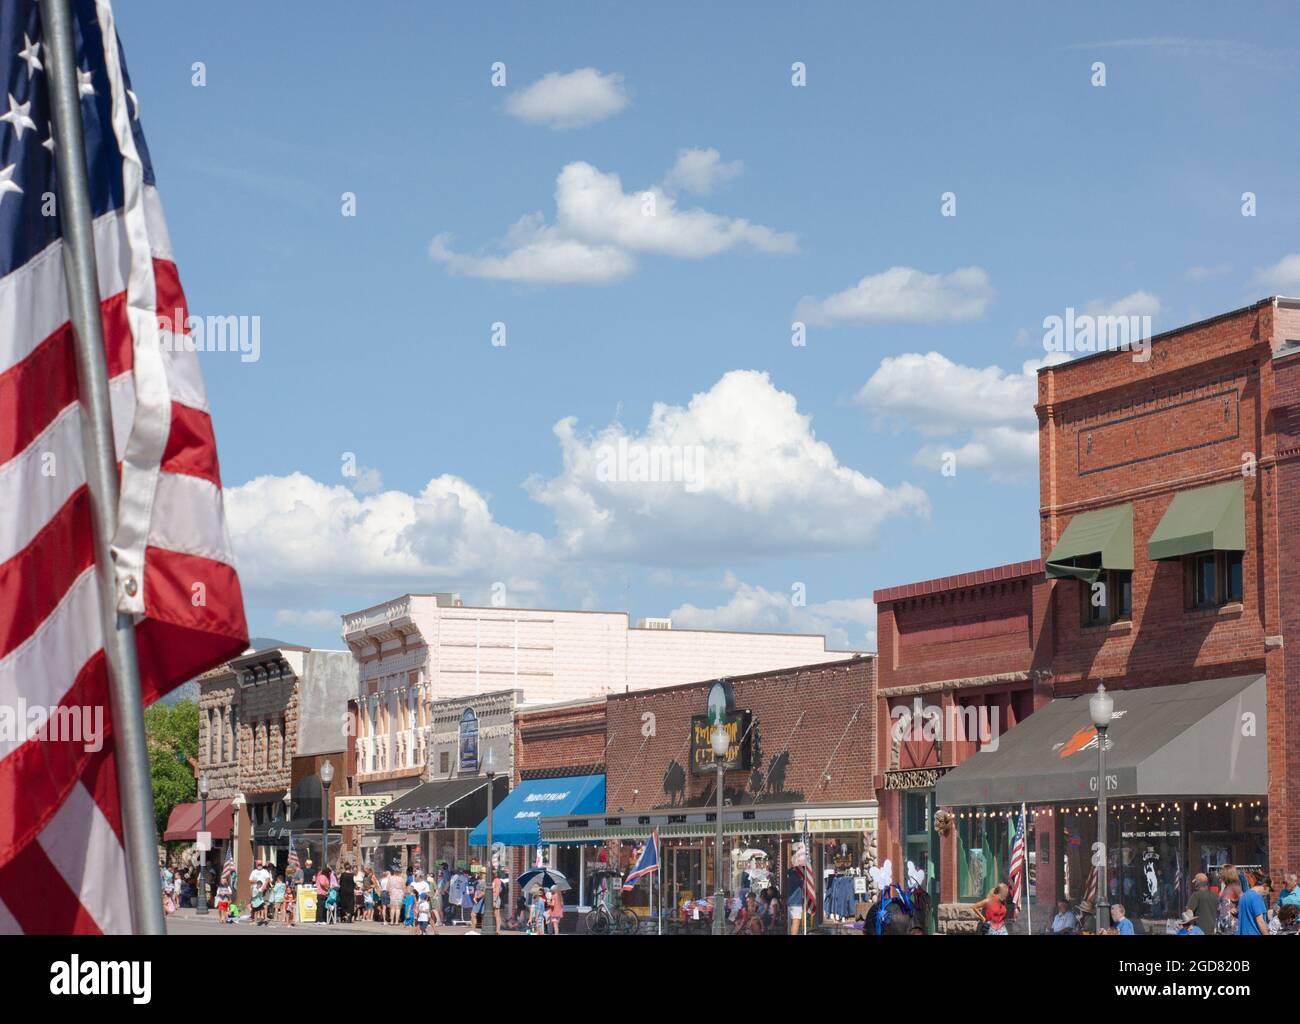 Main Street of Cody, Wyoming, during the Fourth of July celebration. USA flag in the foreground. Stock Photo